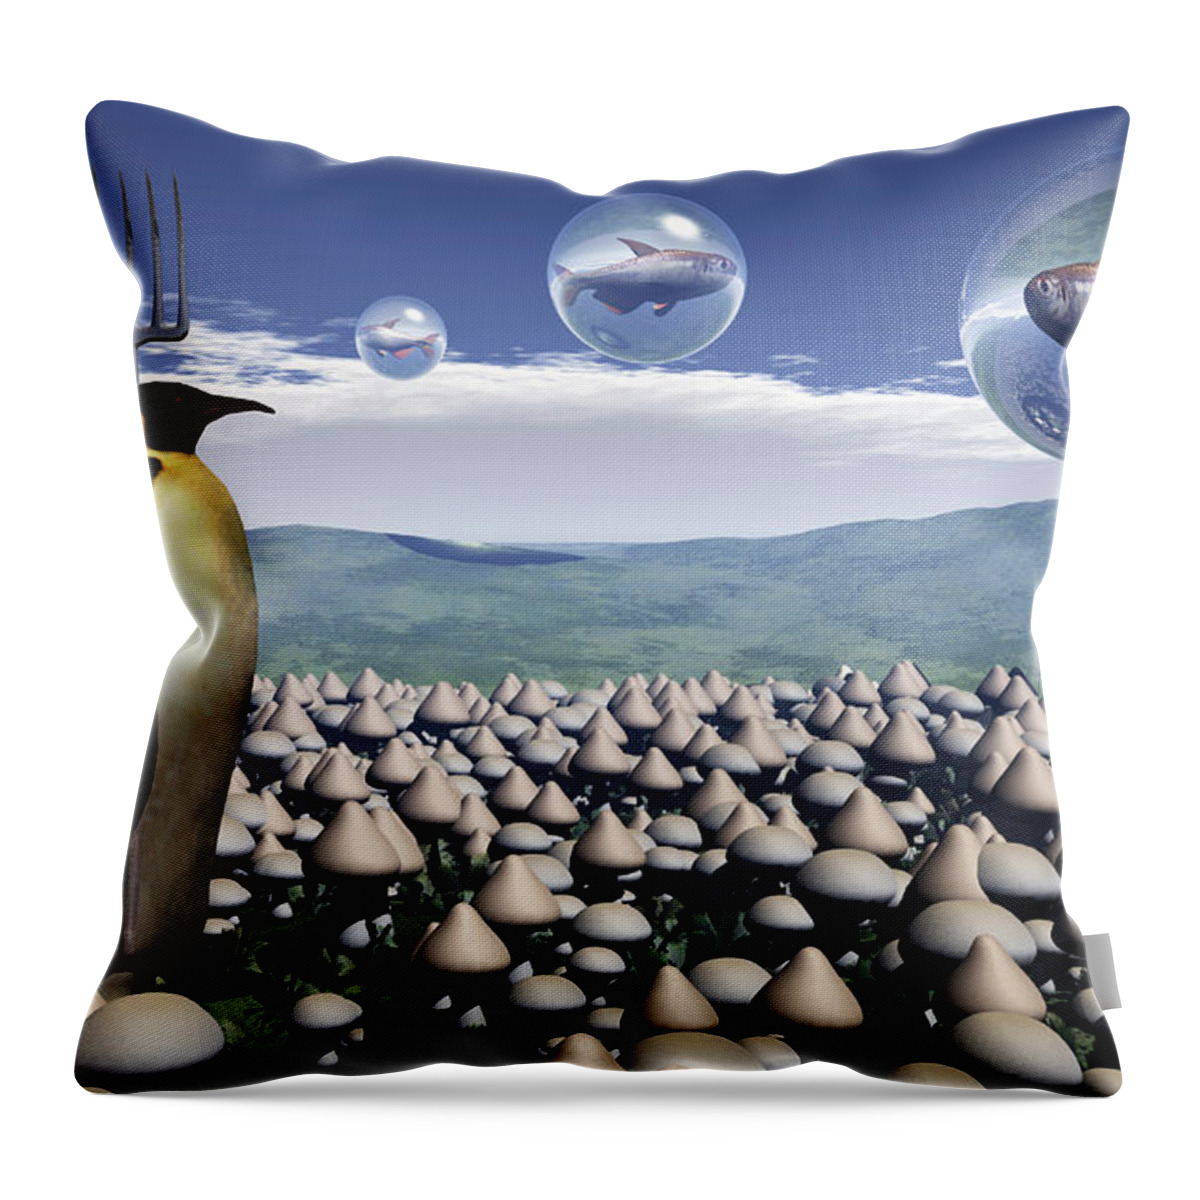 Surreal Throw Pillow featuring the digital art Harvest Day Sightings by Richard Rizzo